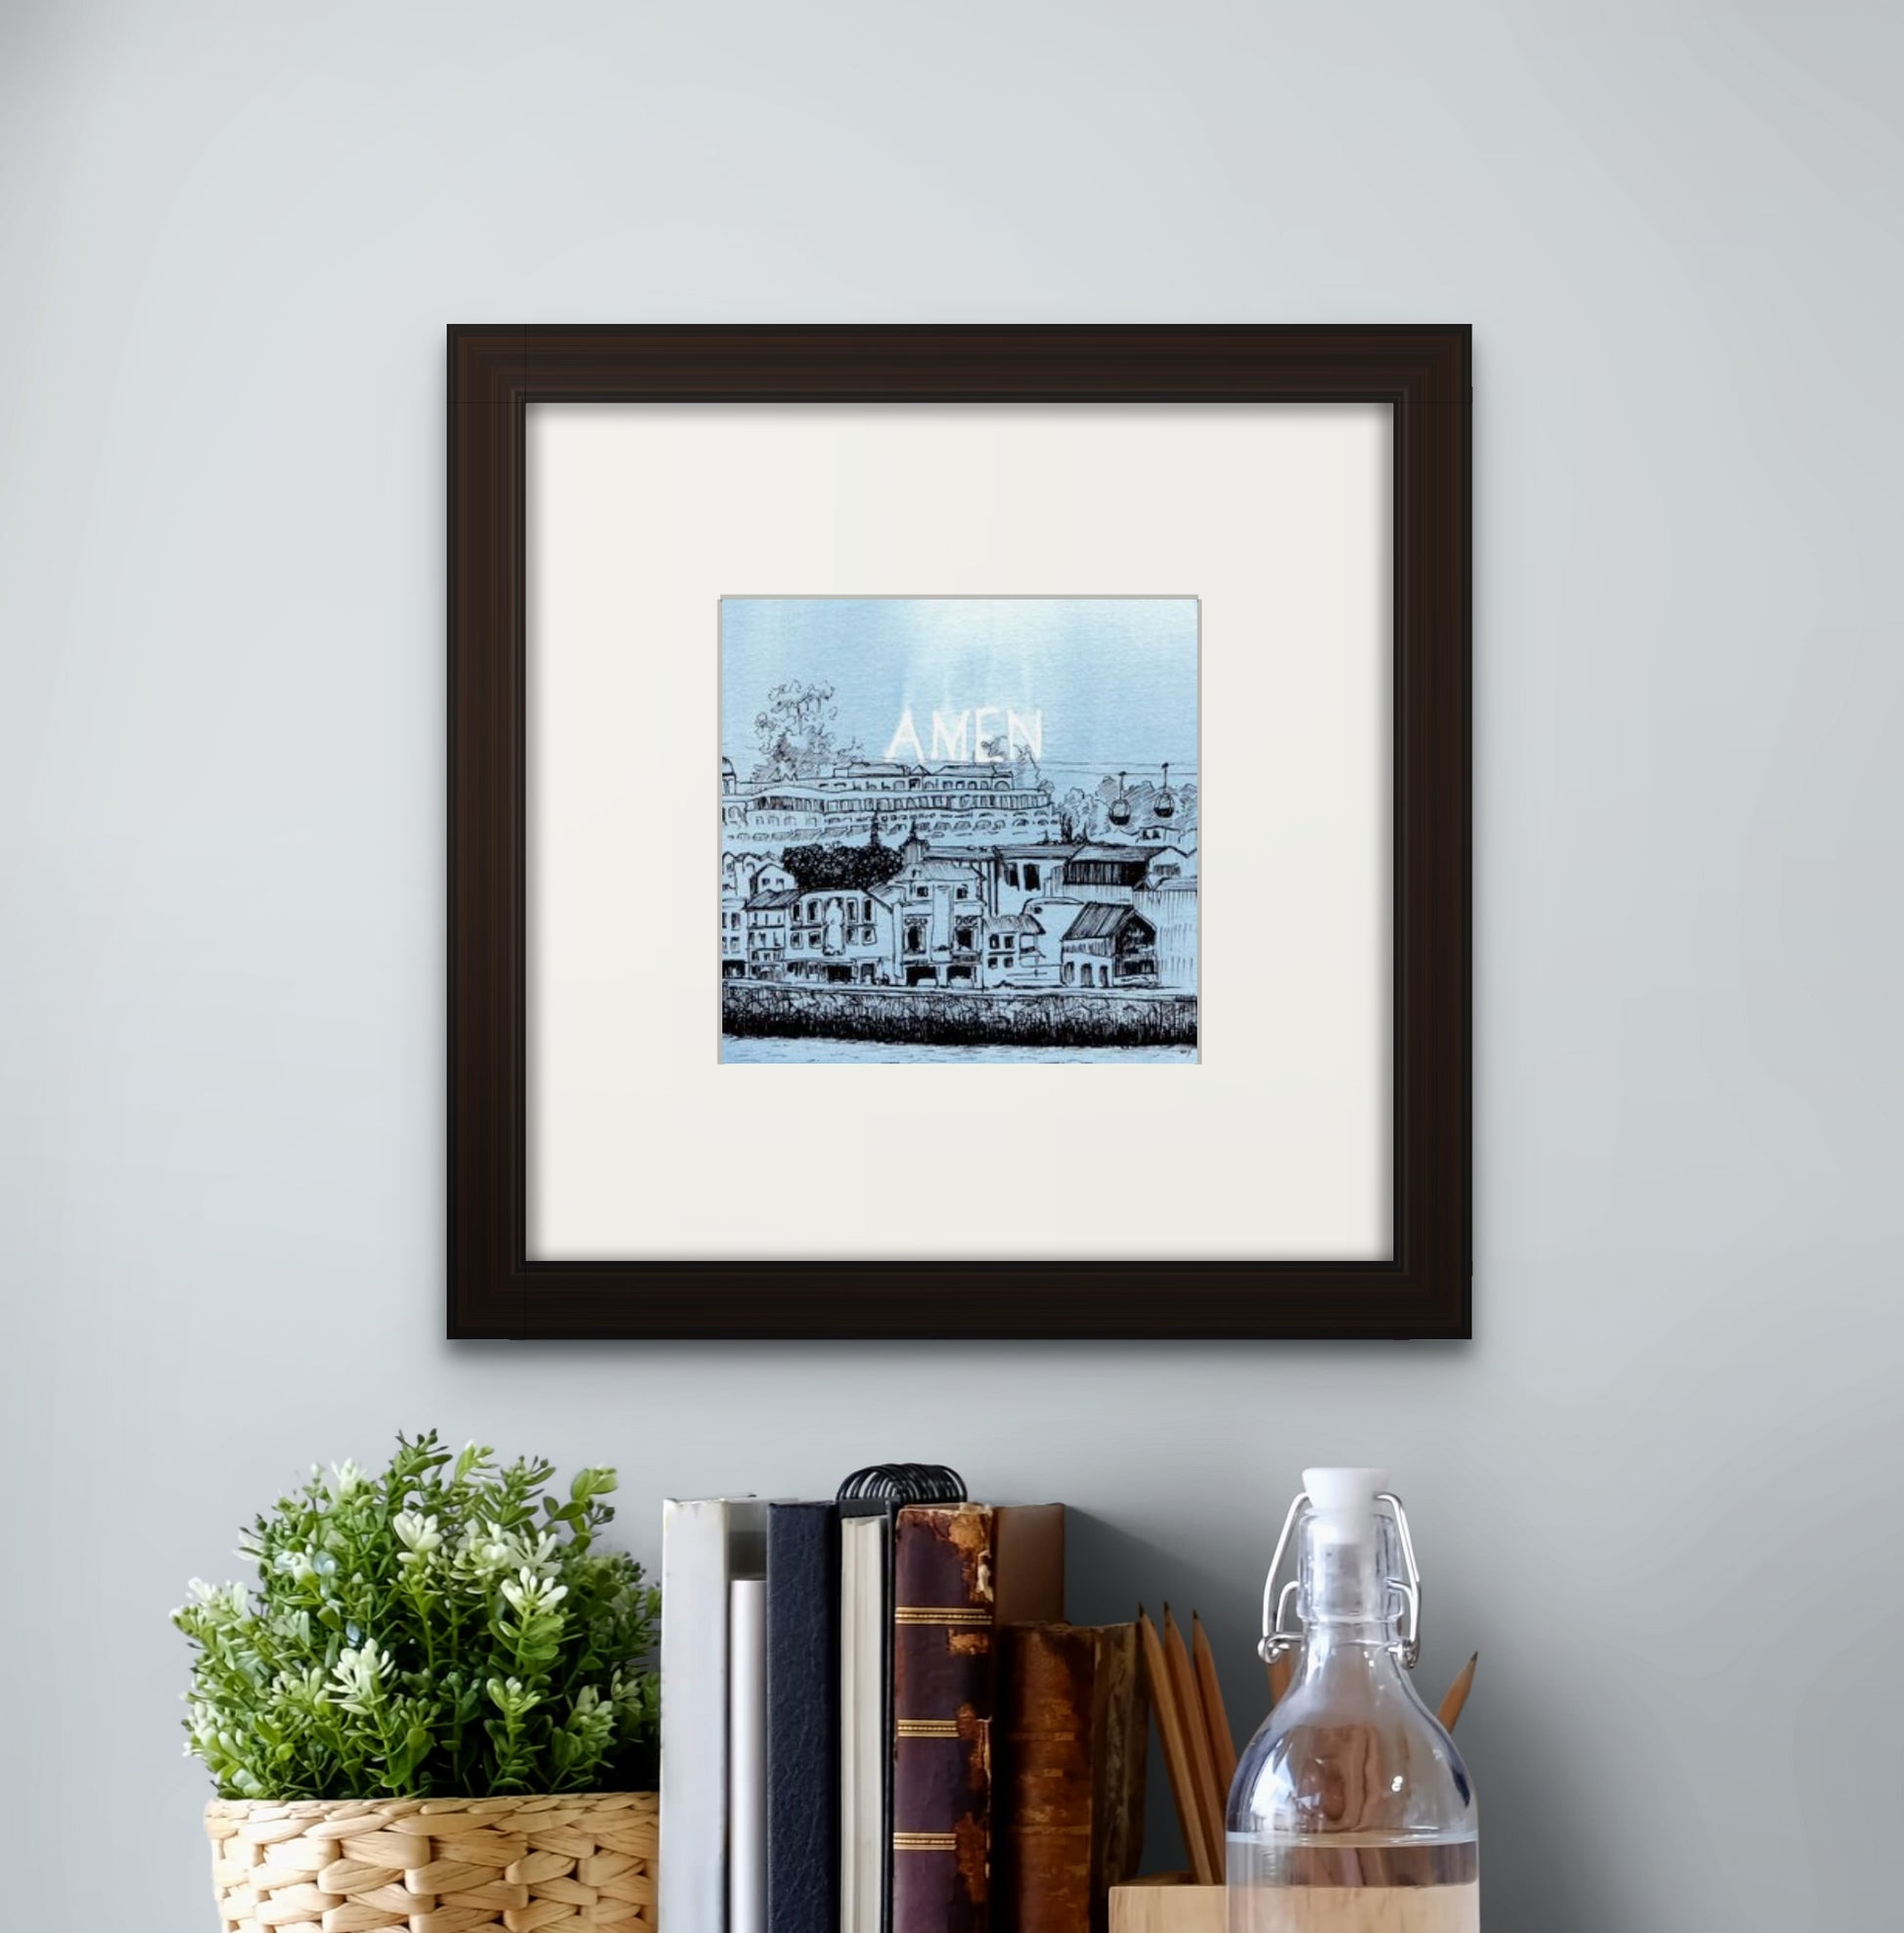 6” x 6” giclée art print with black frame and cream colour mat, hung above a work desk table top. Scenery of Gaia, with old buildings and cable car, seen from Riberia, Porto, Portugal, in line drawing with watercolour. 